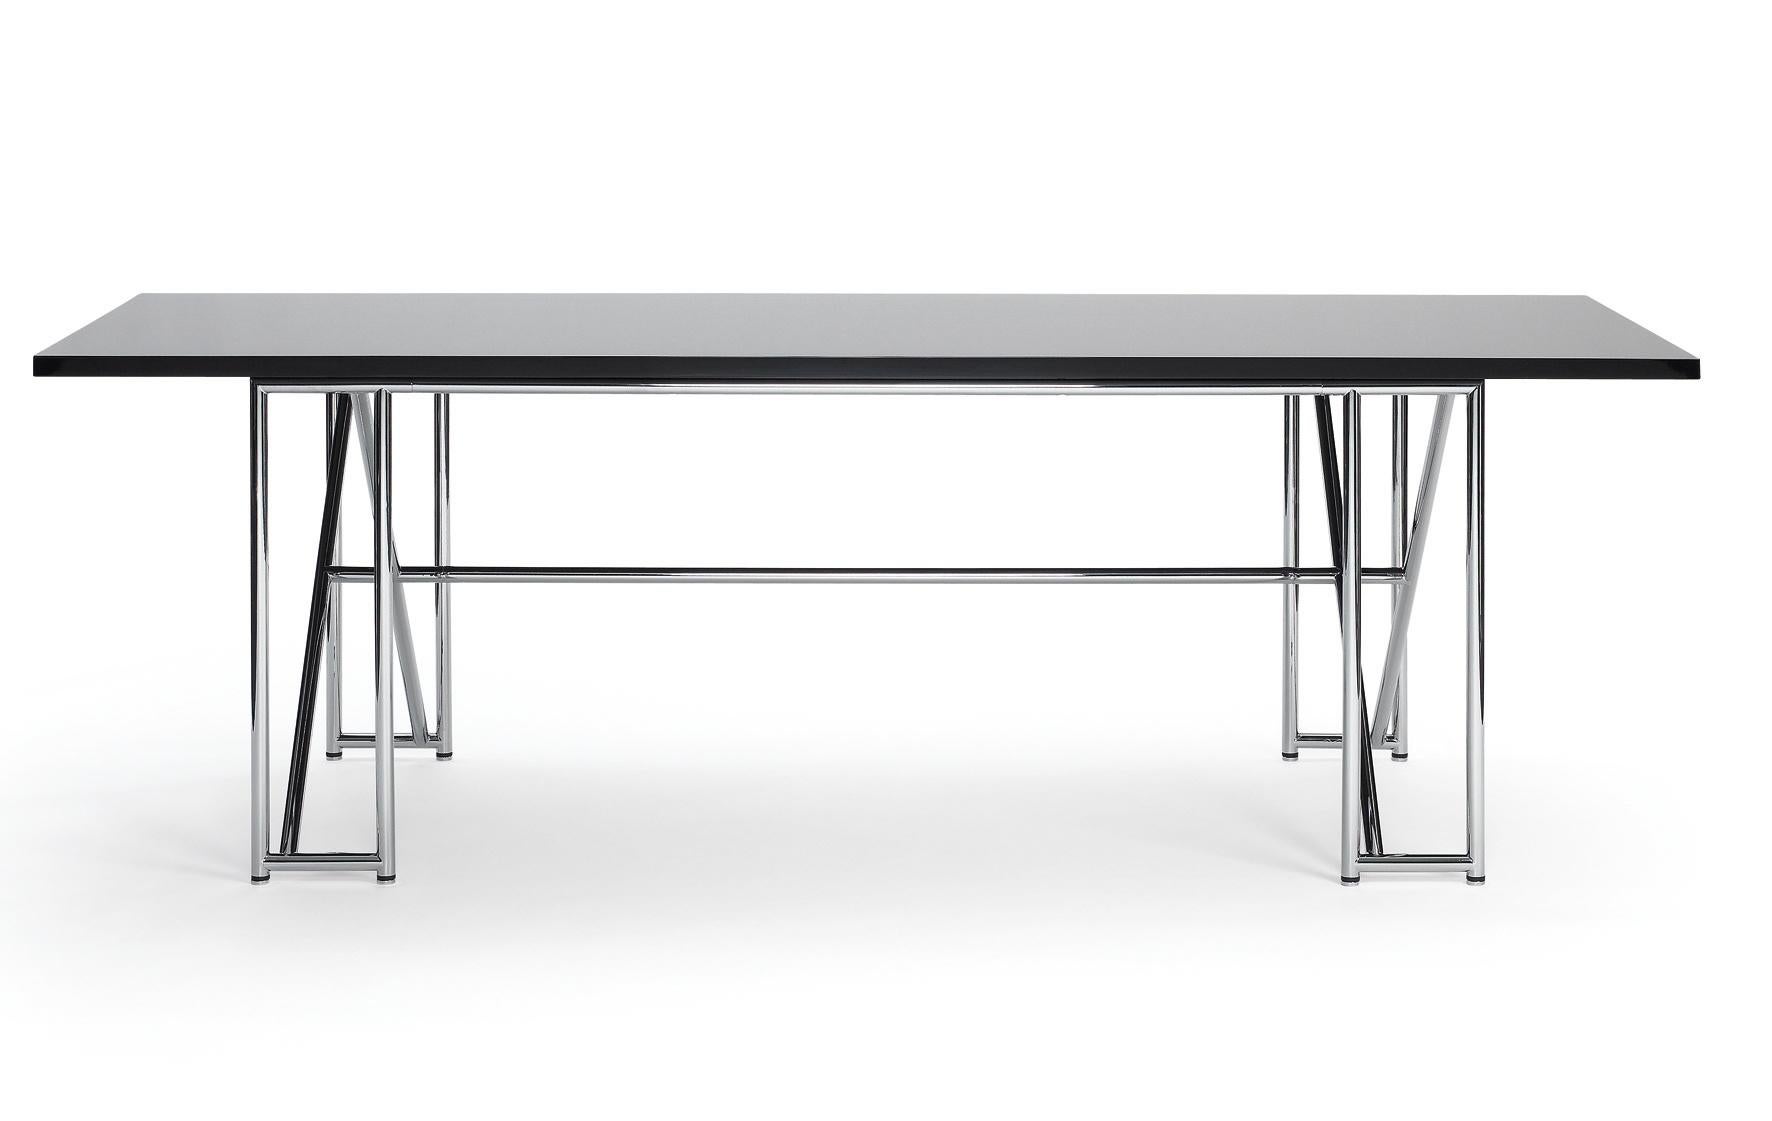 When an Avant Garde steel tube design meets the classical refectory table, the result is the double X. A large, yet elegant table, its X-shaped supports make for optimum rigidity. Like so many of Eileen Gray‘s designs, the double X is a master of